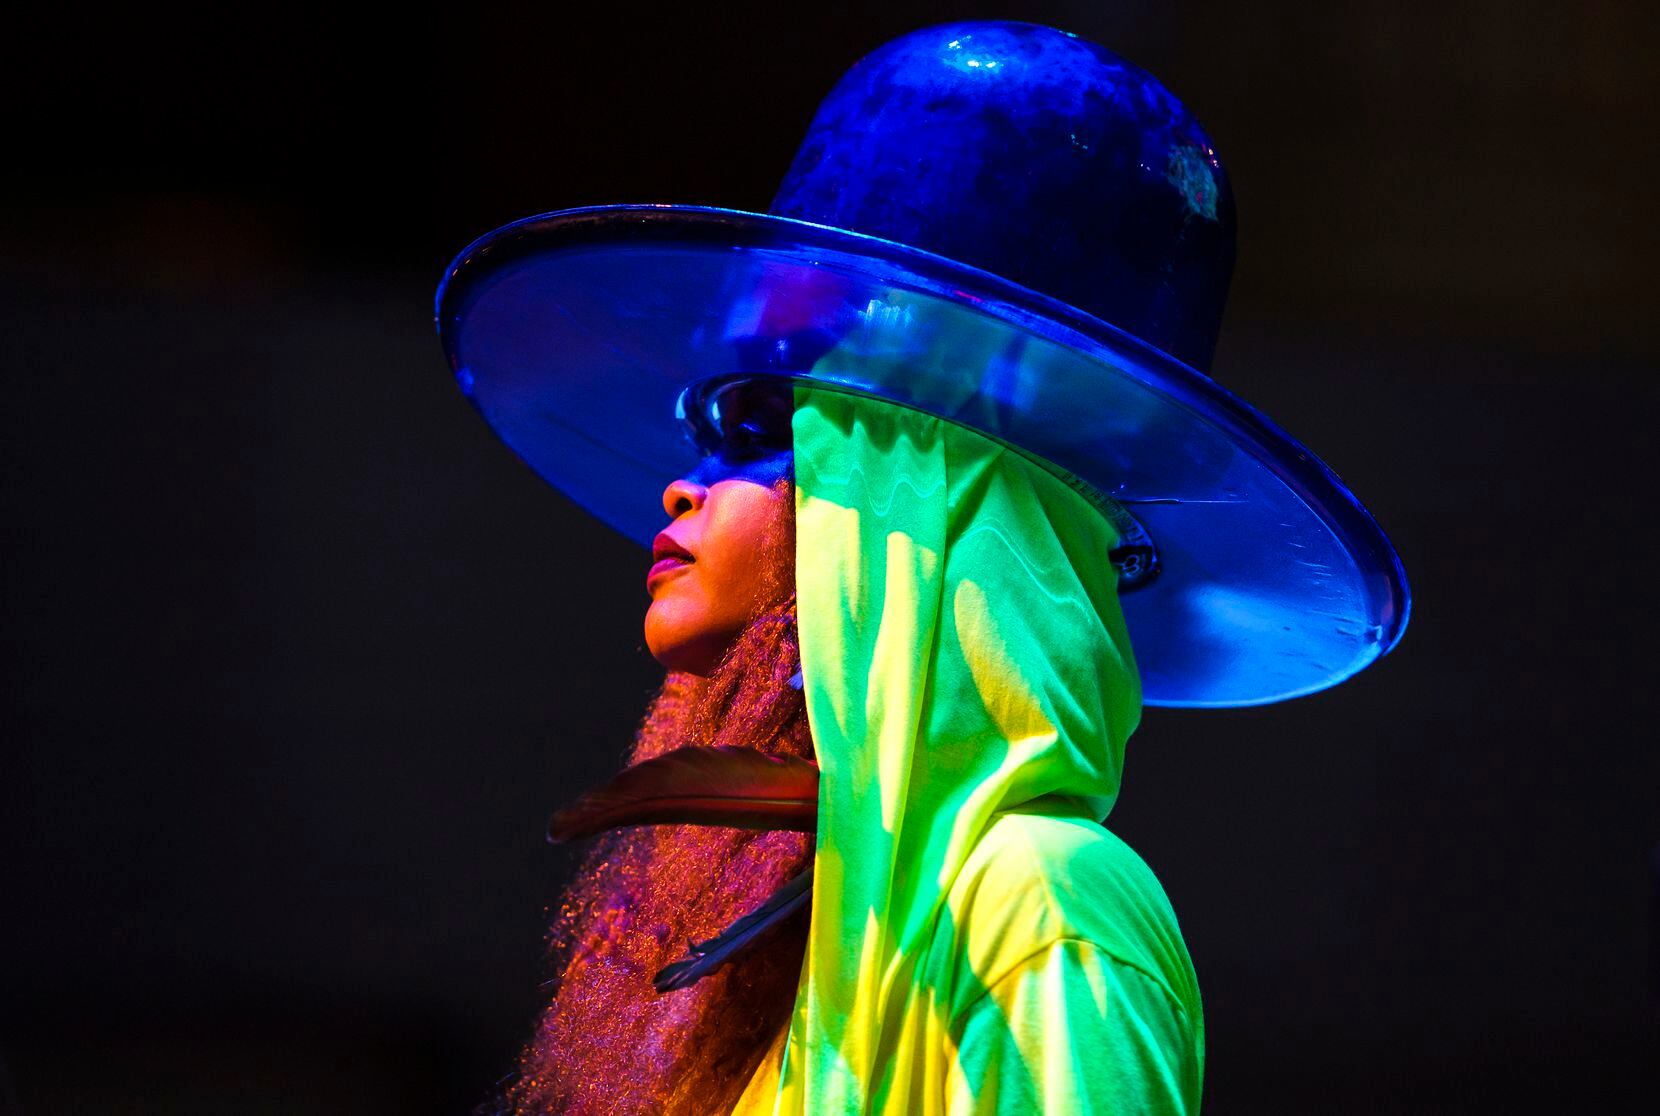 Erykah Badu performs with the Dallas Symphony Orchestra at the Meyerson Symphony Center in...